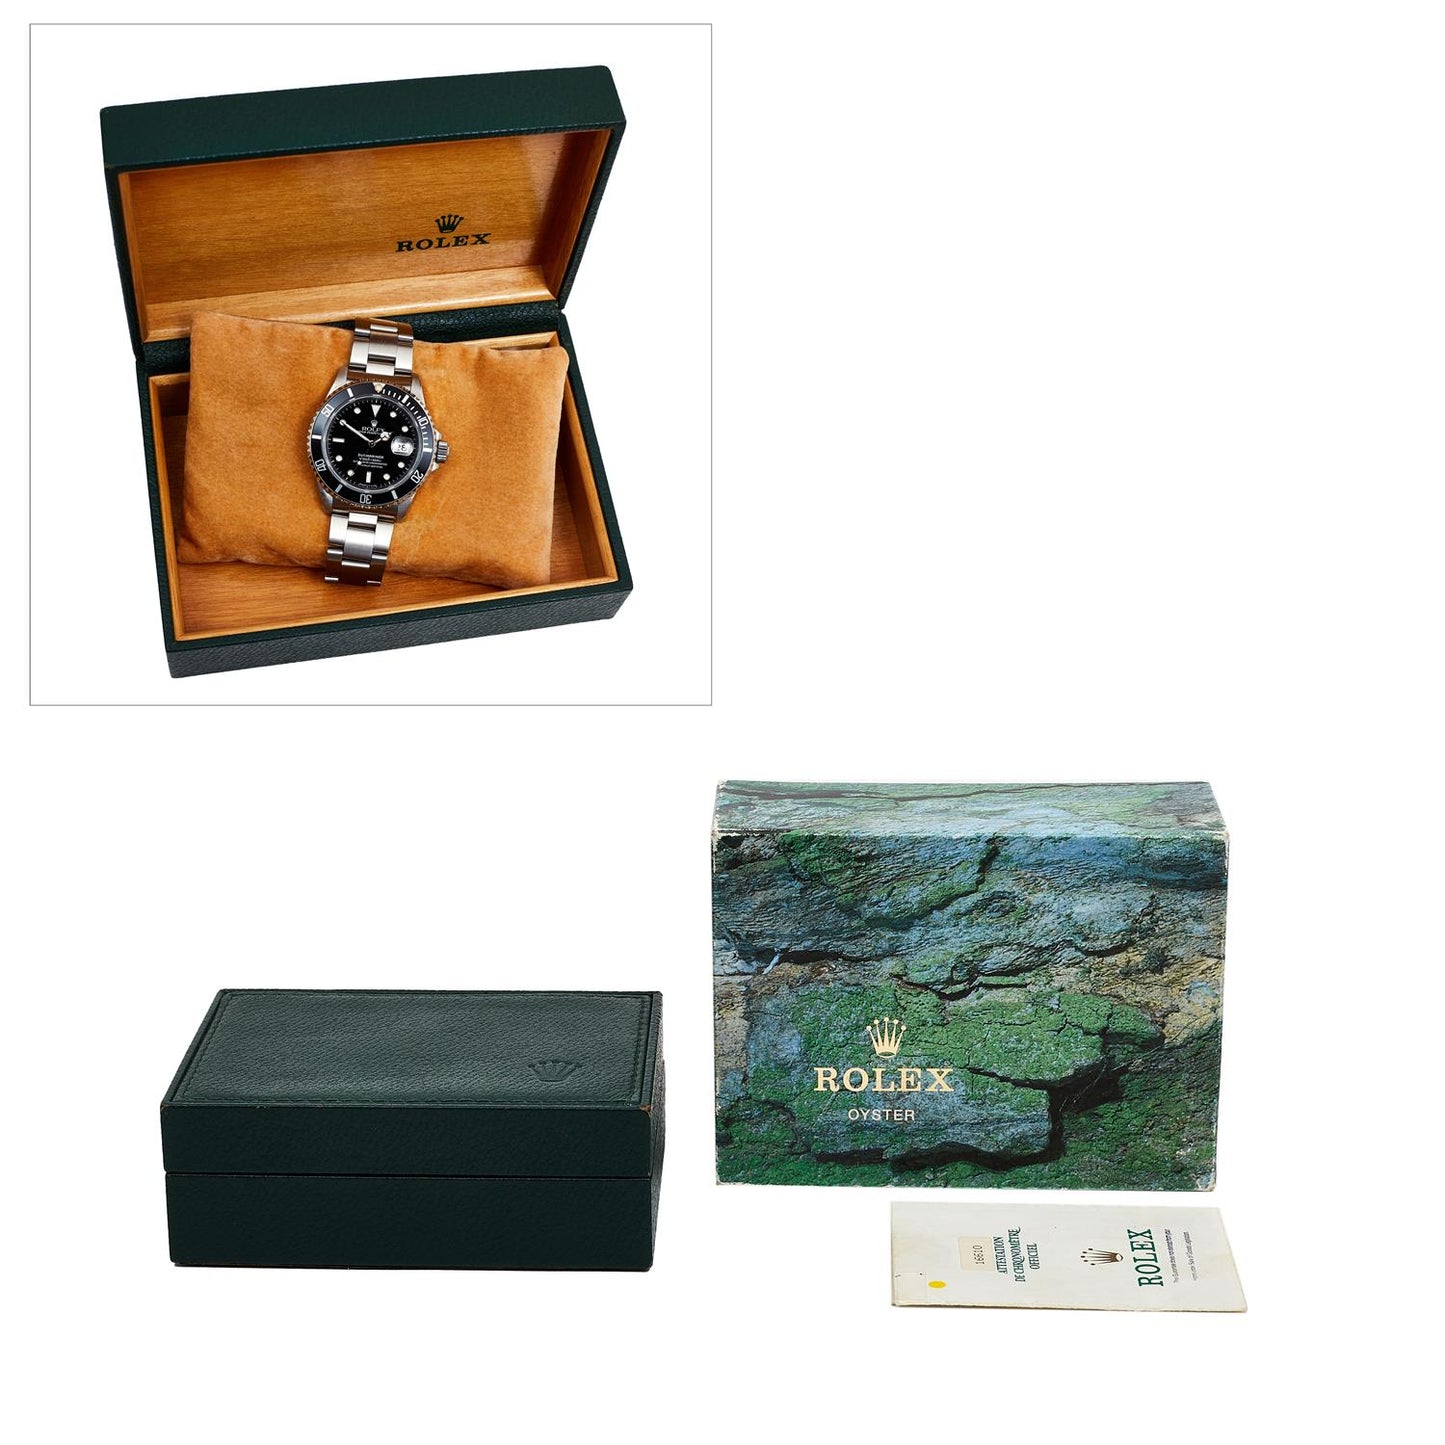 Pre-Owned Rolex Submariner Date 40 16610